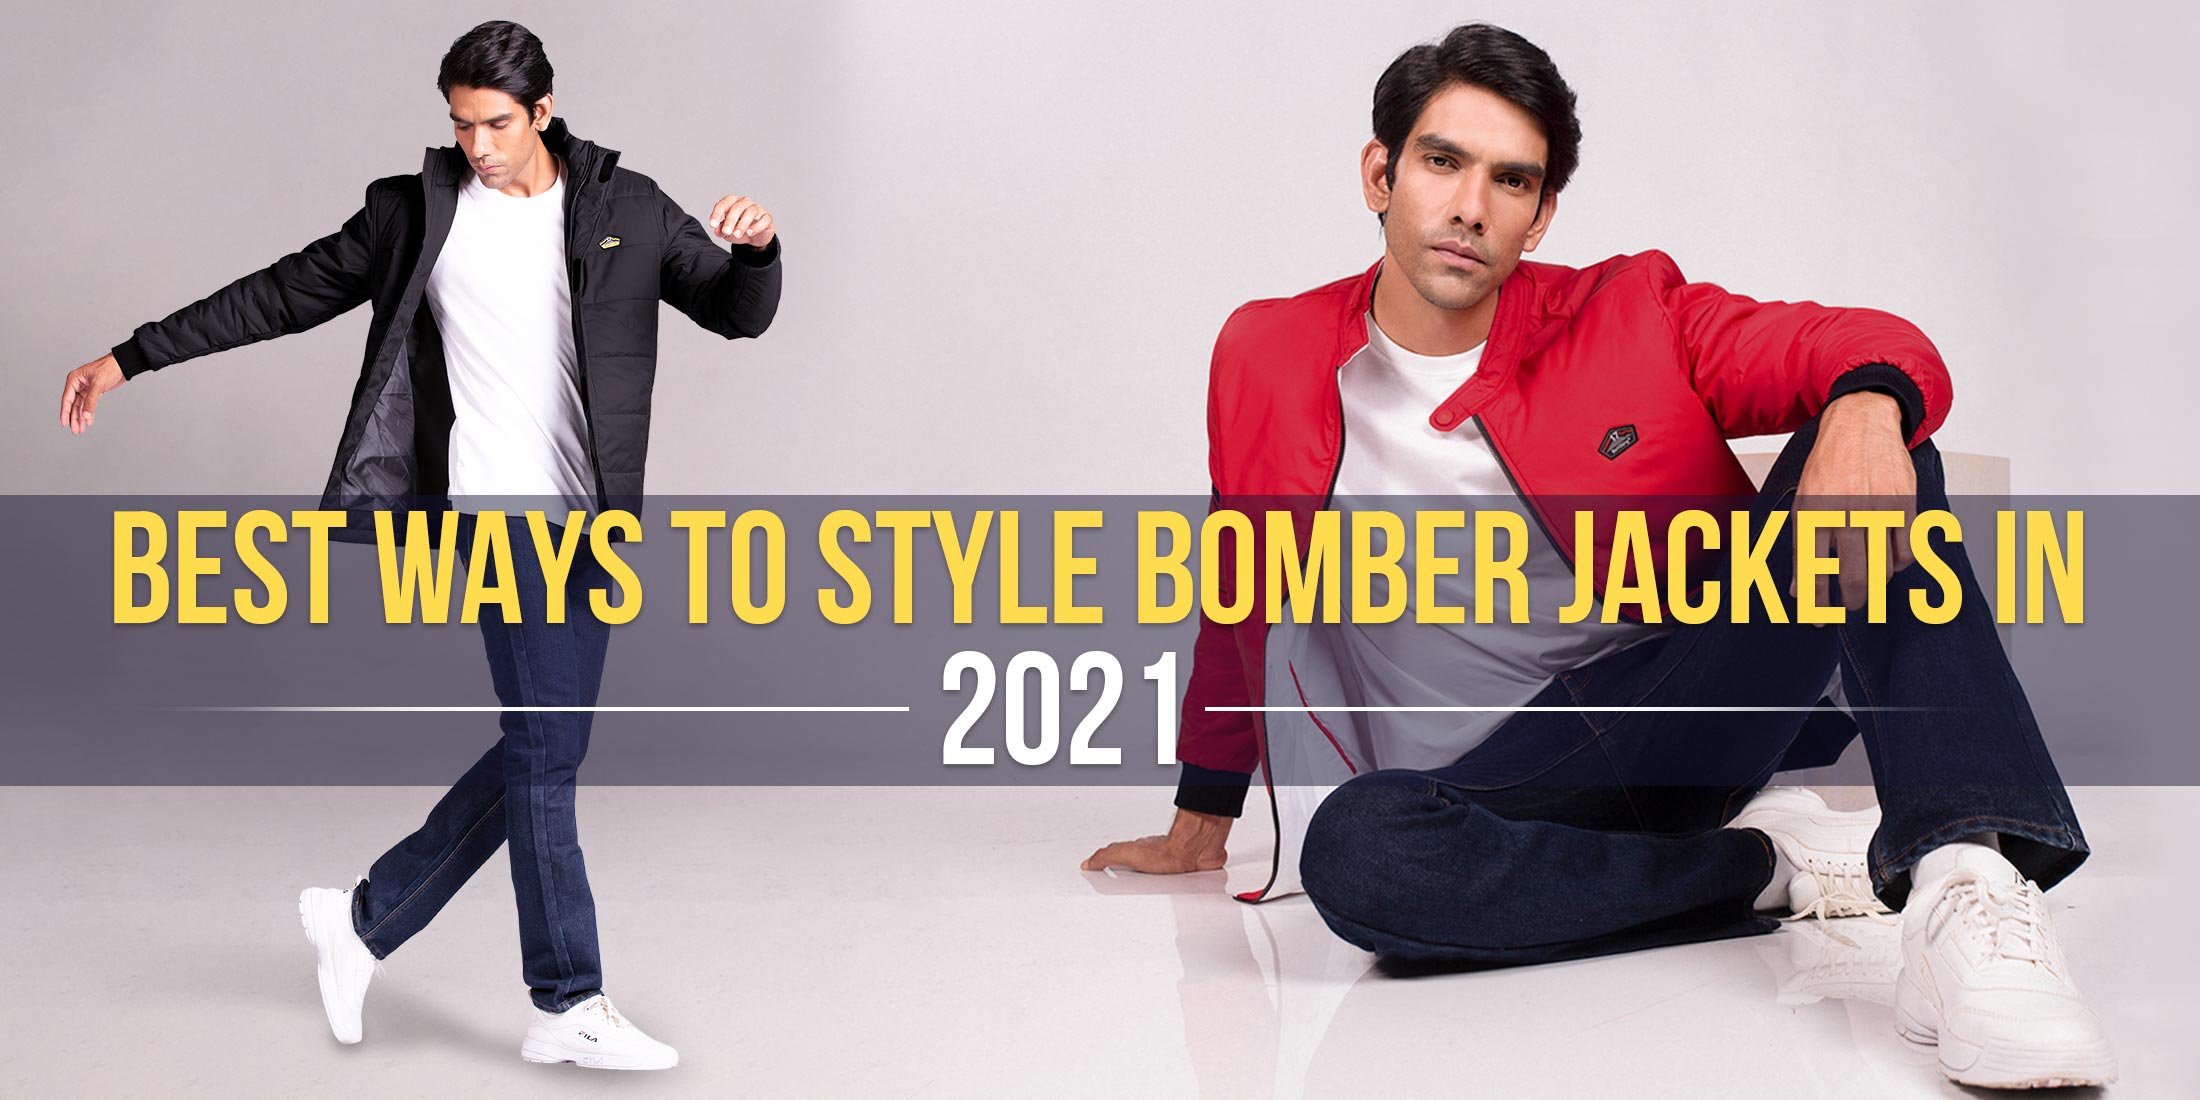 Bomber Jacket Outfit Ideas For Men